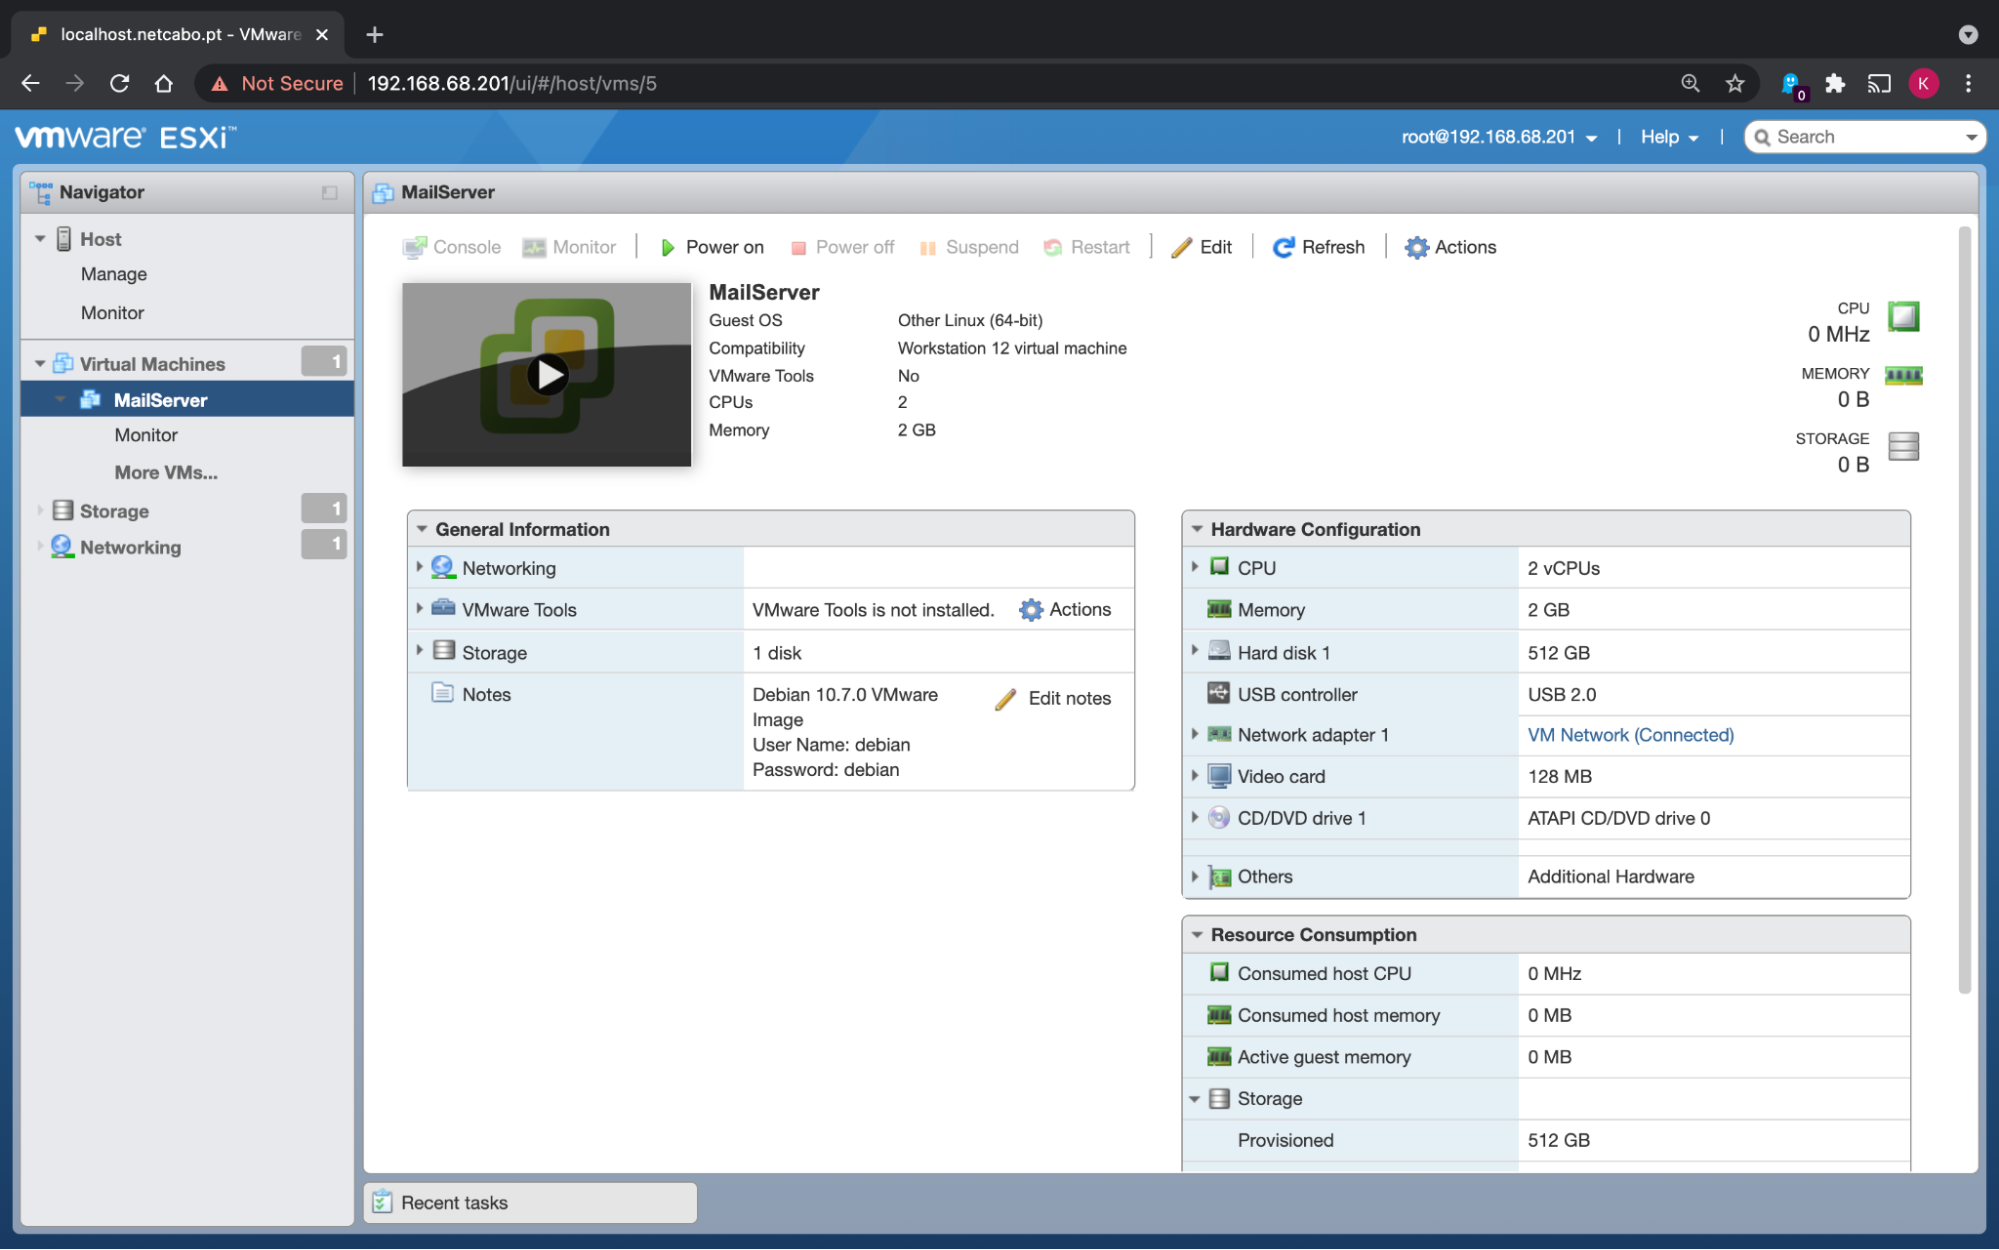 The configuration settings for the VMS can be viewed now on ESXi